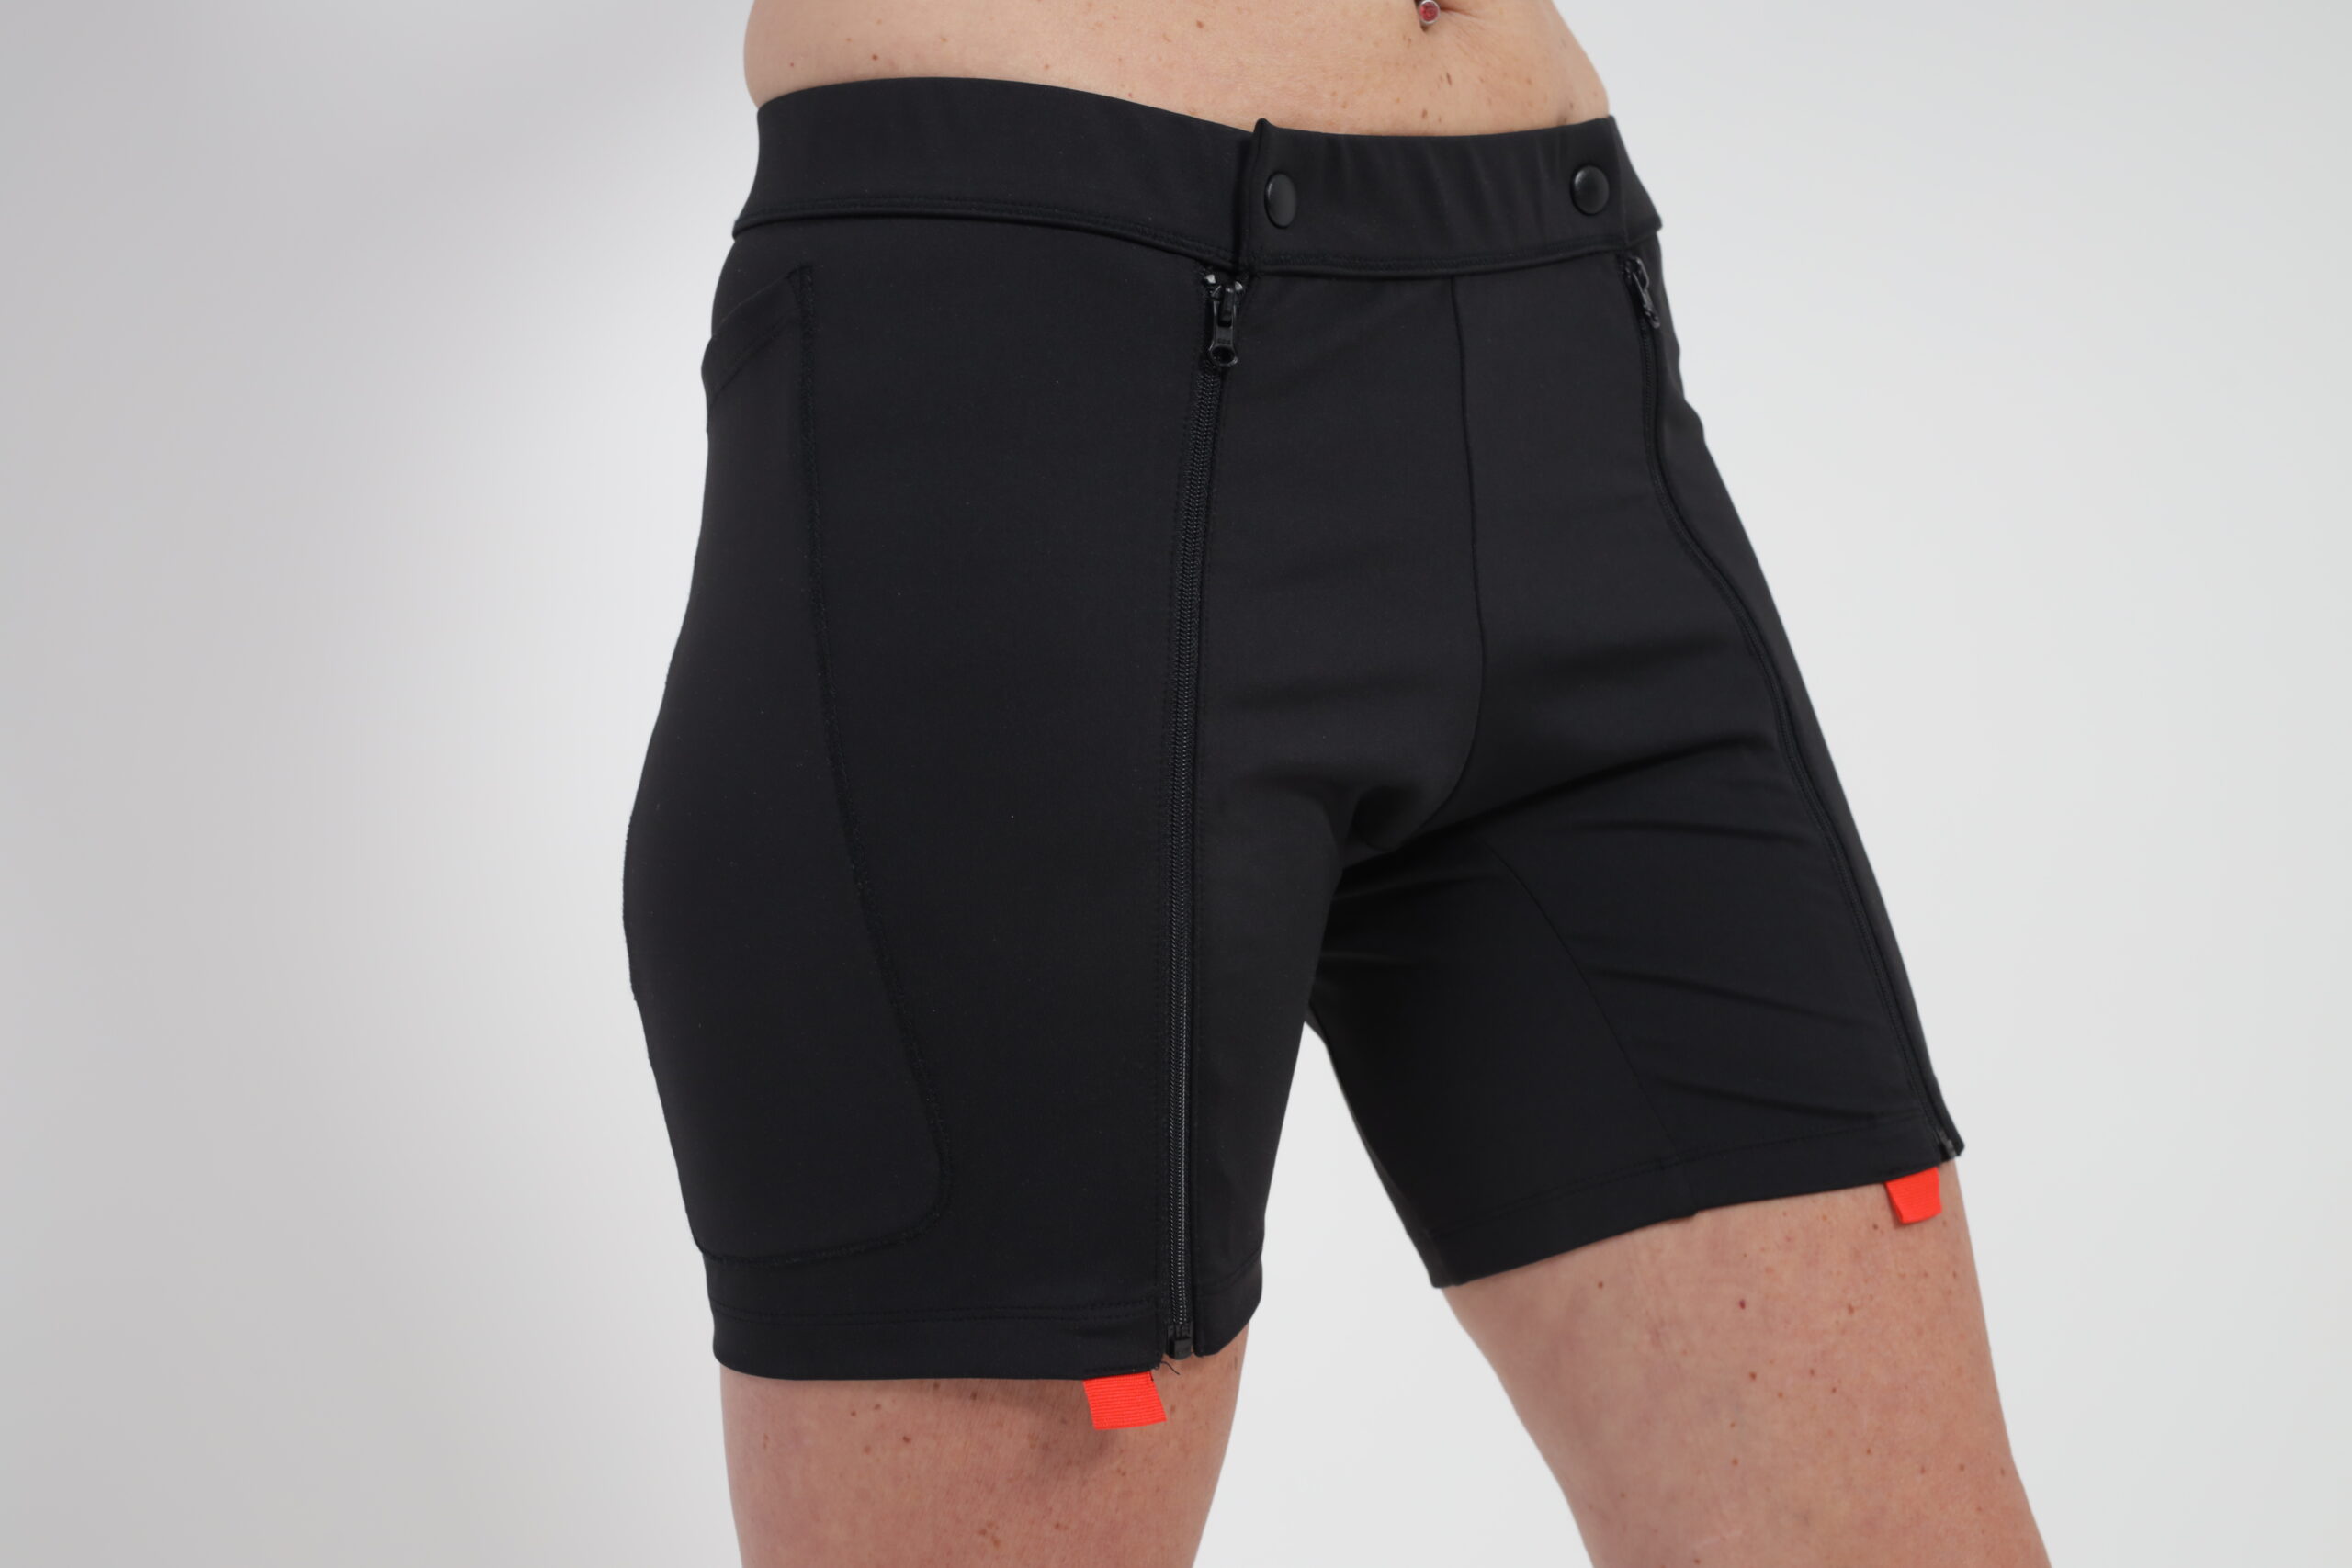 Crafted to ensure comfort following surgery, these black shorts have a stretchable waistband, a subtle red detail at the hem, and are tailored as No-Bend Clothing for Hip Surgery.